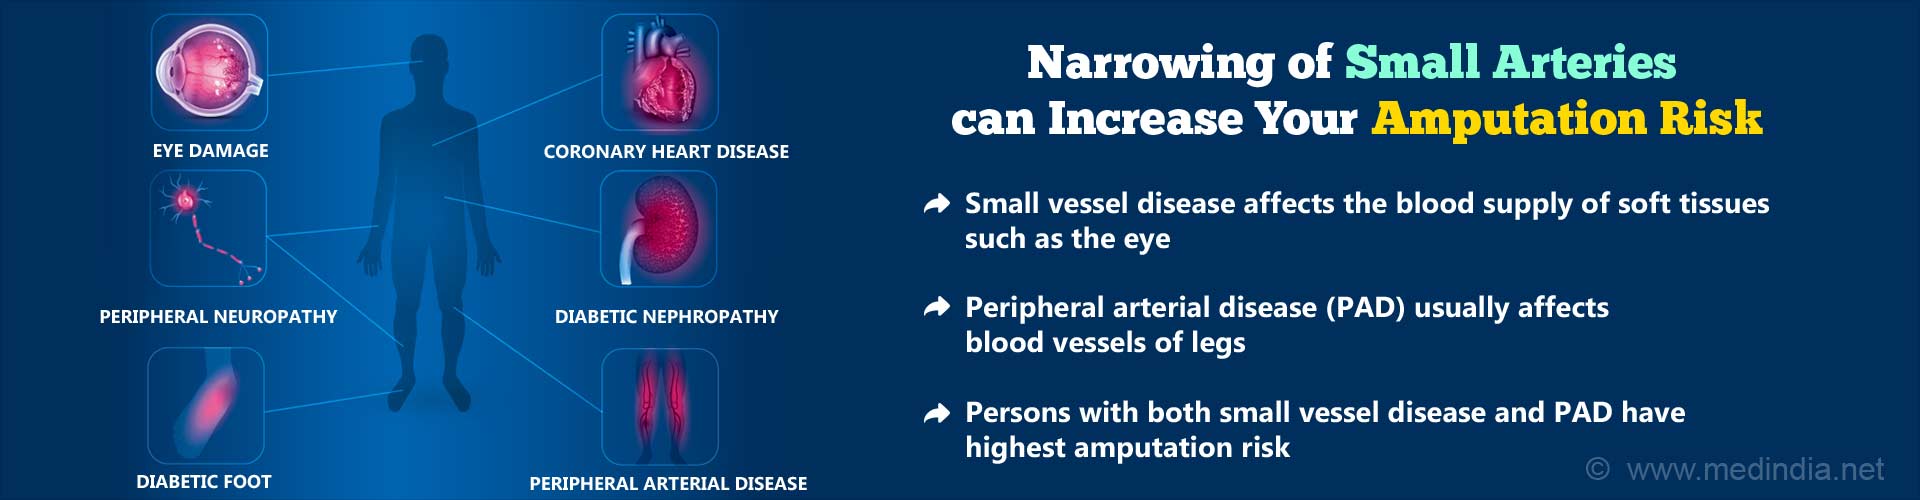 Narrowing of small arteries can increase your amputation risk. Small vessel disease affects the blood supply of soft tissues such as the eye. Peripheral arterial disease (PAD) usually affects blood vessels of legs. Persons with both small vessel disease and PAD have highest amputation risk.
